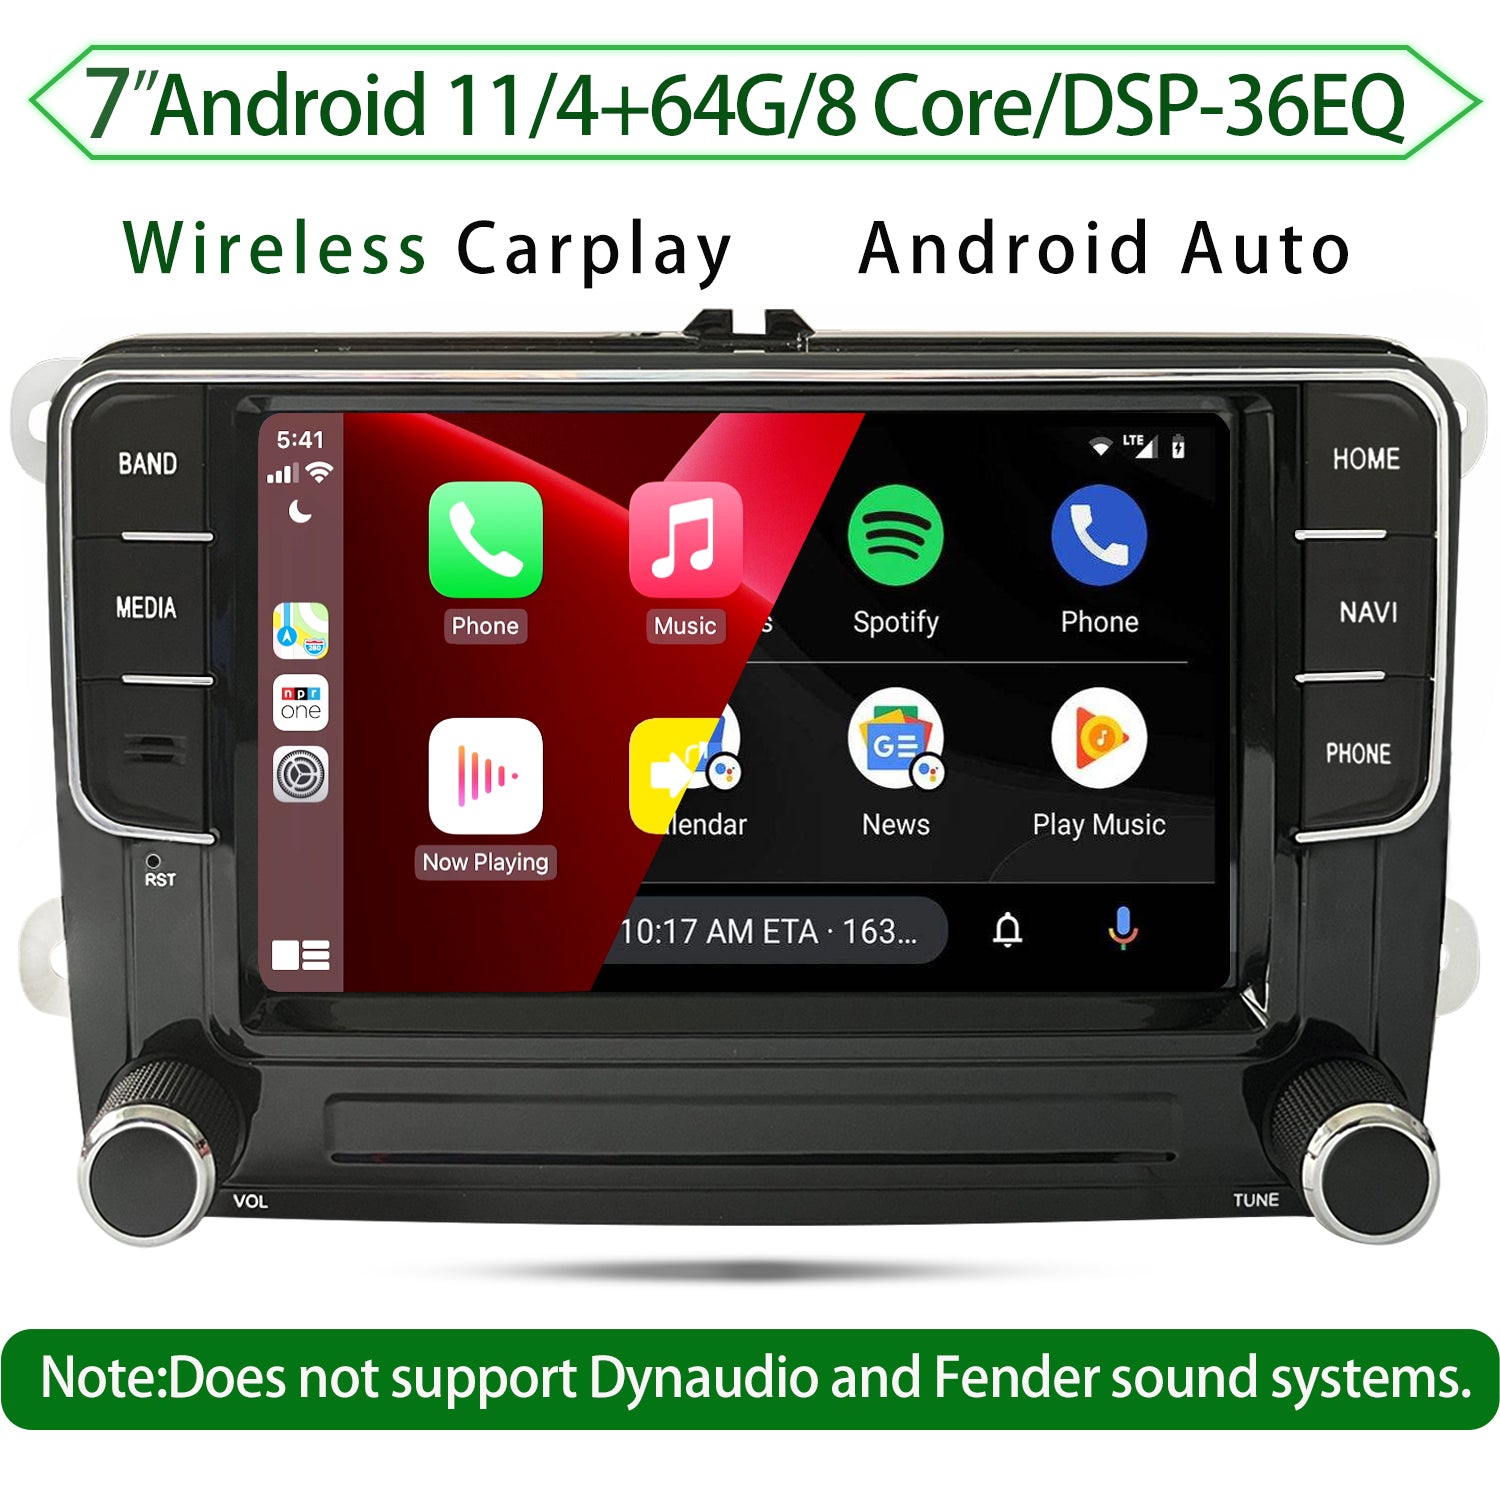  Android 13 Car Radio for VW Passat Jetta Seat Golf Skoda Polo  Touran, [1G+32GB] 7 inch Touch Screen Volkswagen Stereo with Wired&Wireless  CarPlay Android Auto Bluetooth GPS WiFi FM+Backup Camera 